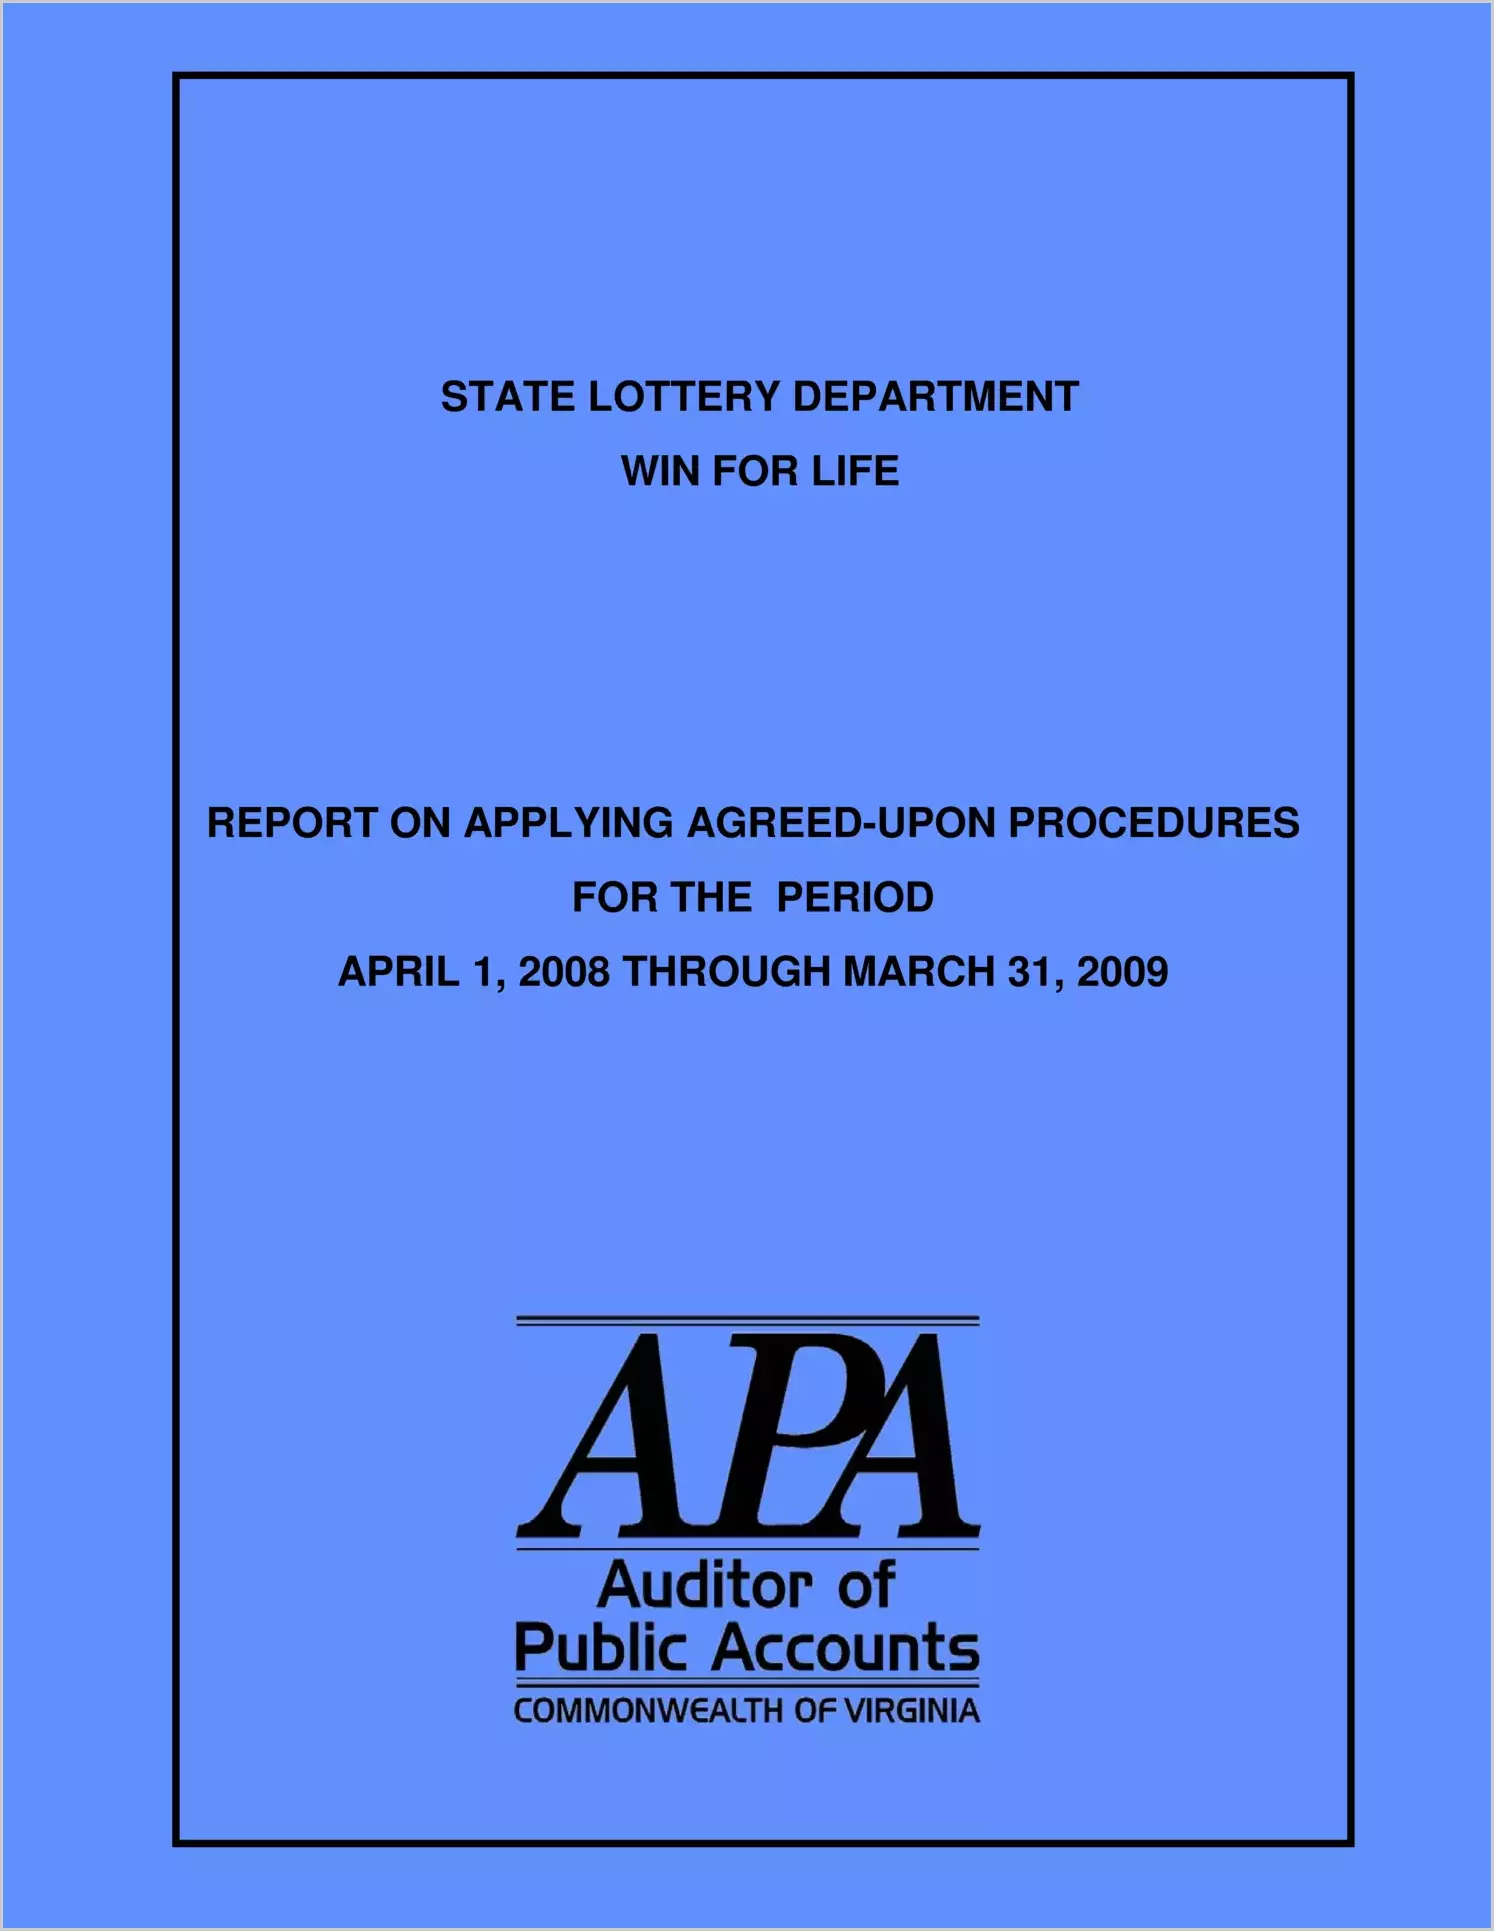 State Lottery Department Wind For Life report on Applying Agreed-Upon Procedures for the period April 1, 2008 throuhg March 31, 2009